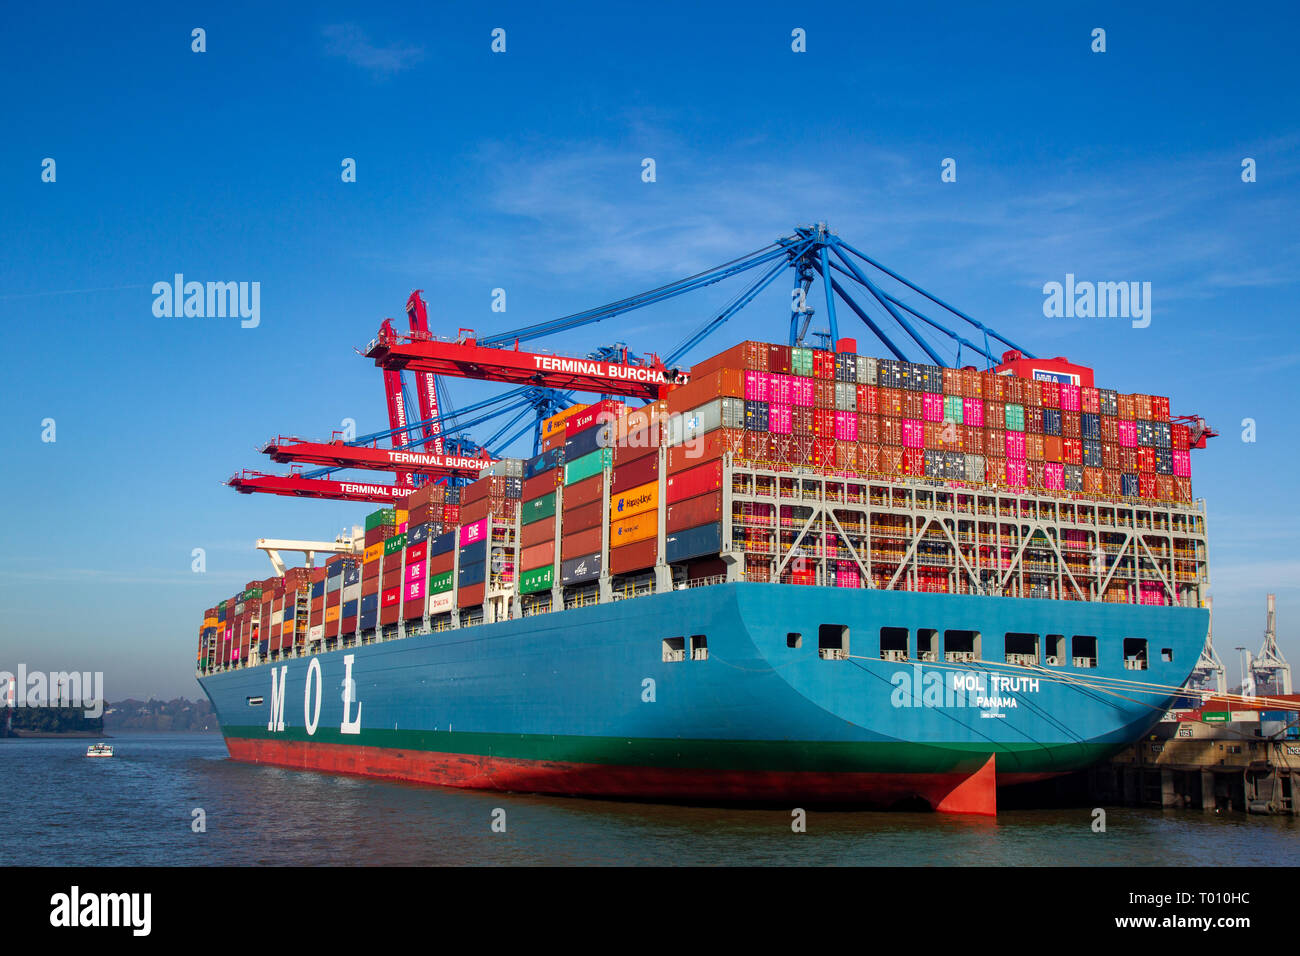 The MOL Truth, one of the biggest container ships of the world, at Burchardkai in the harbour of Hamburg, Germany. Stock Photo